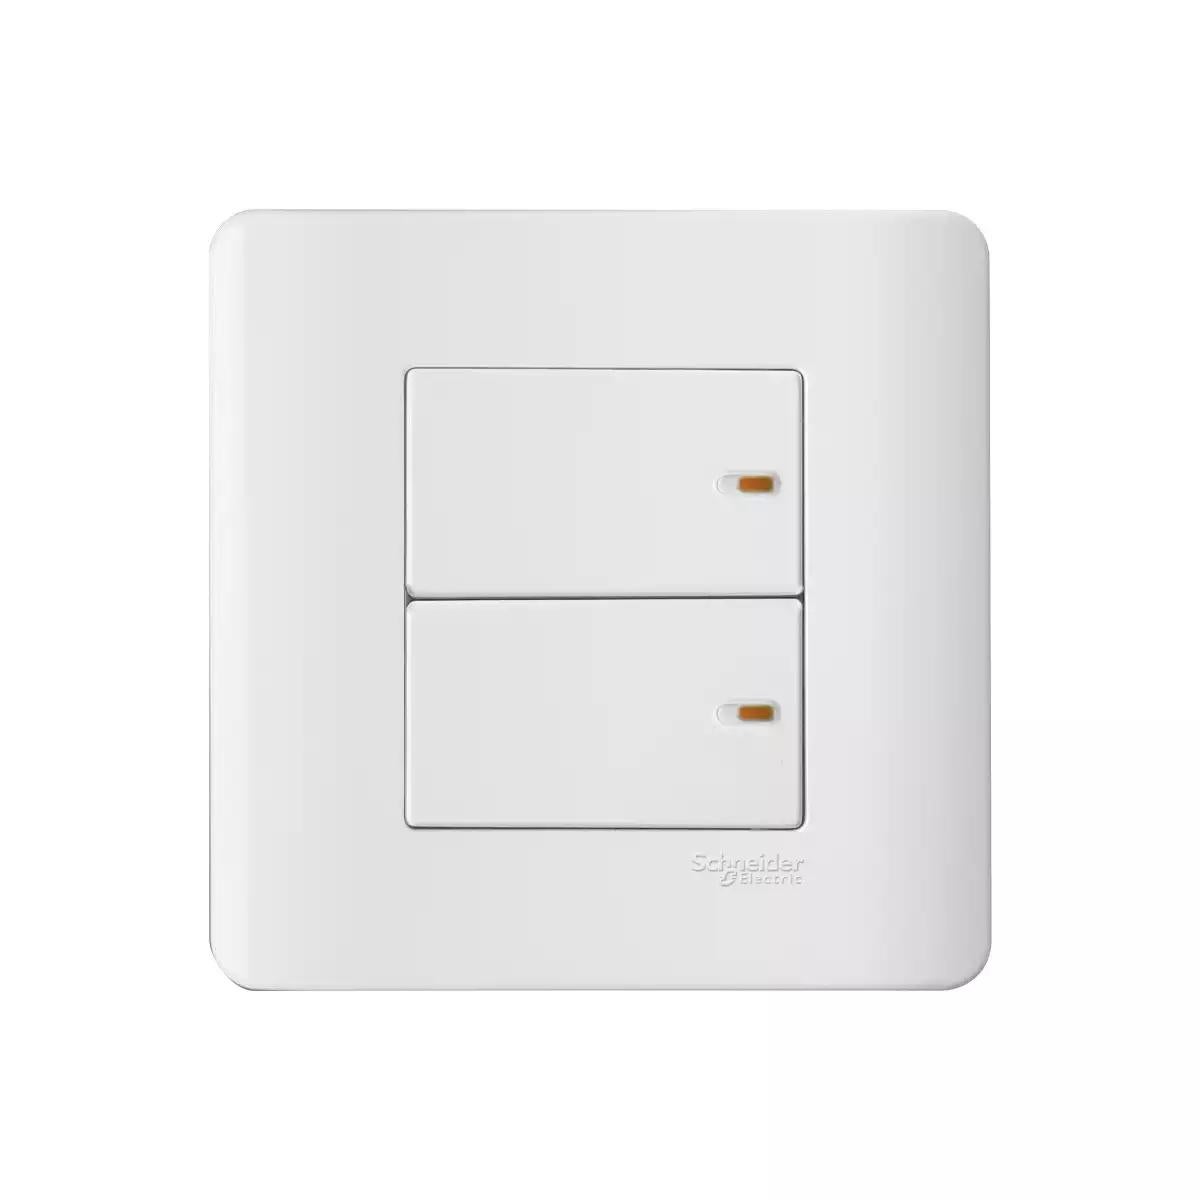 16 A X/20 A 2 gang 2wfull - flat switch White